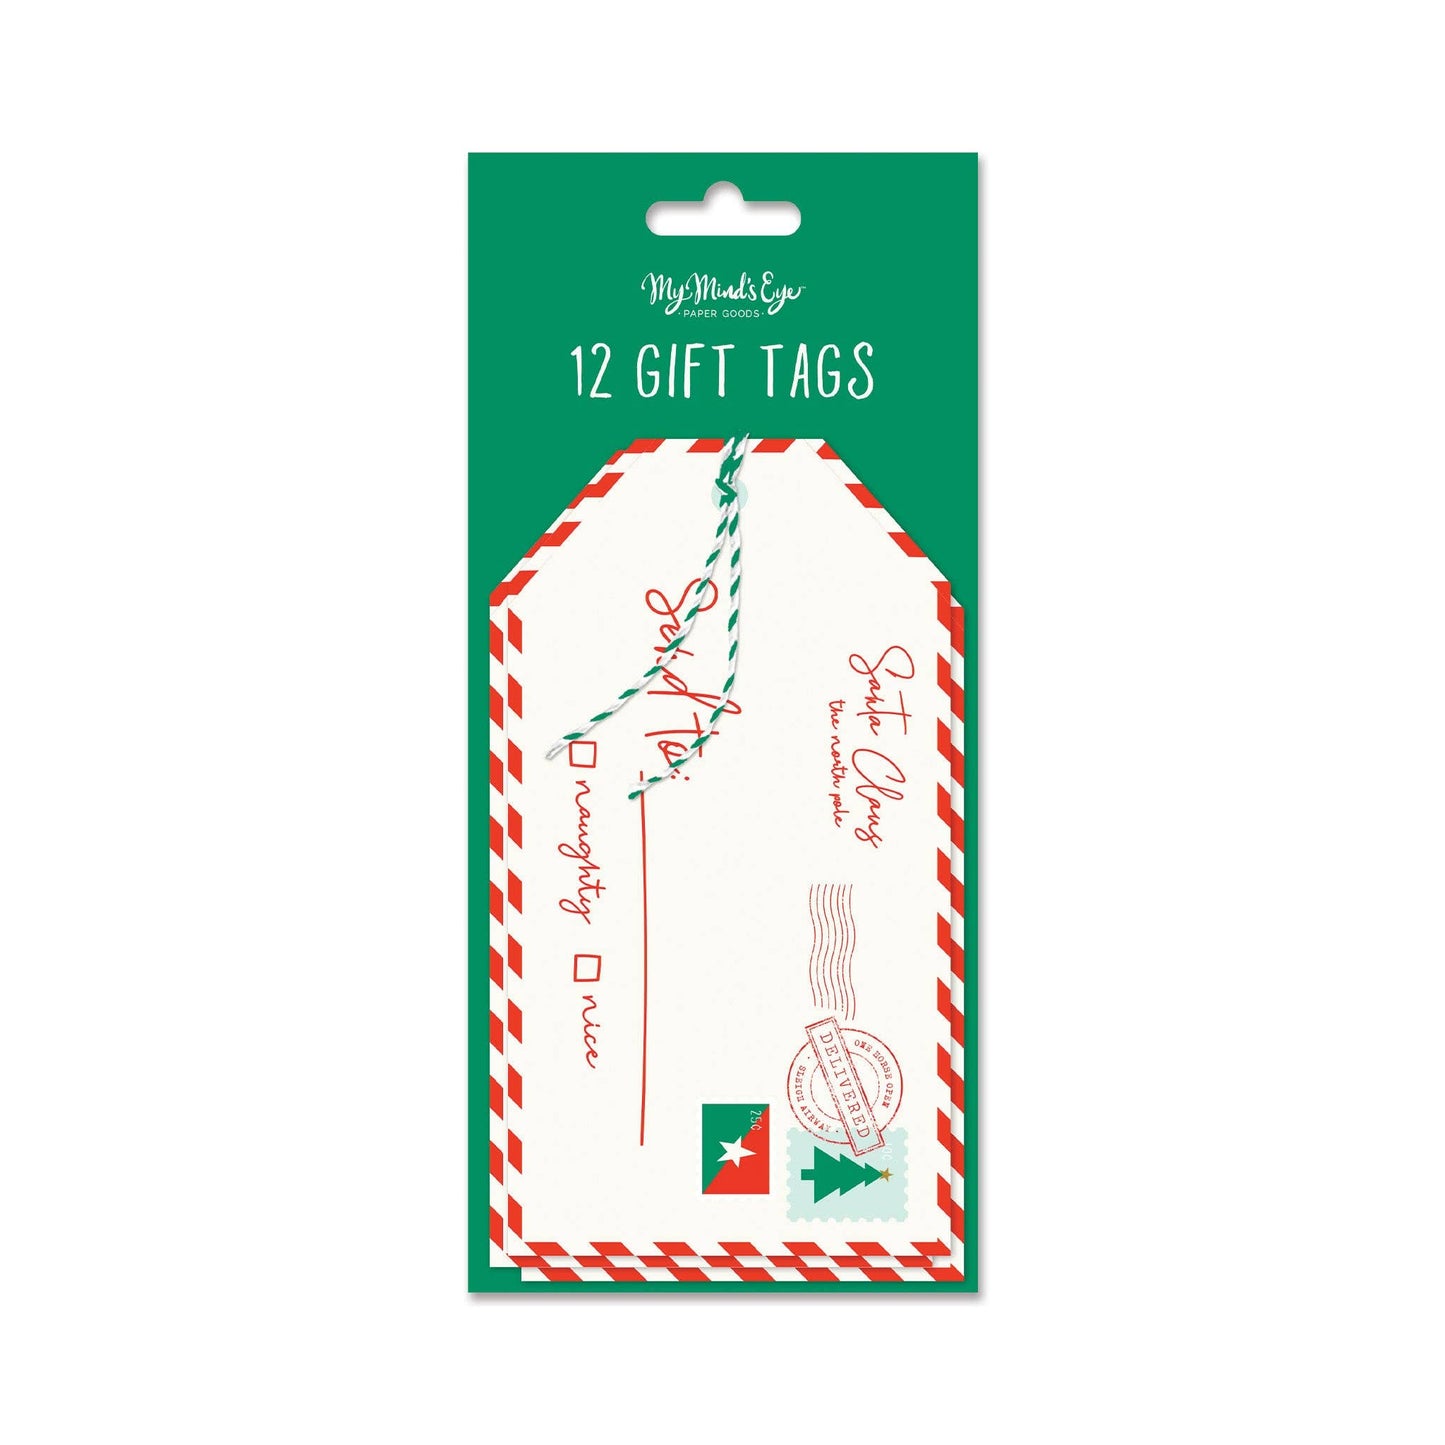 PLGT94 - Letter to Santa Over-sized Tags